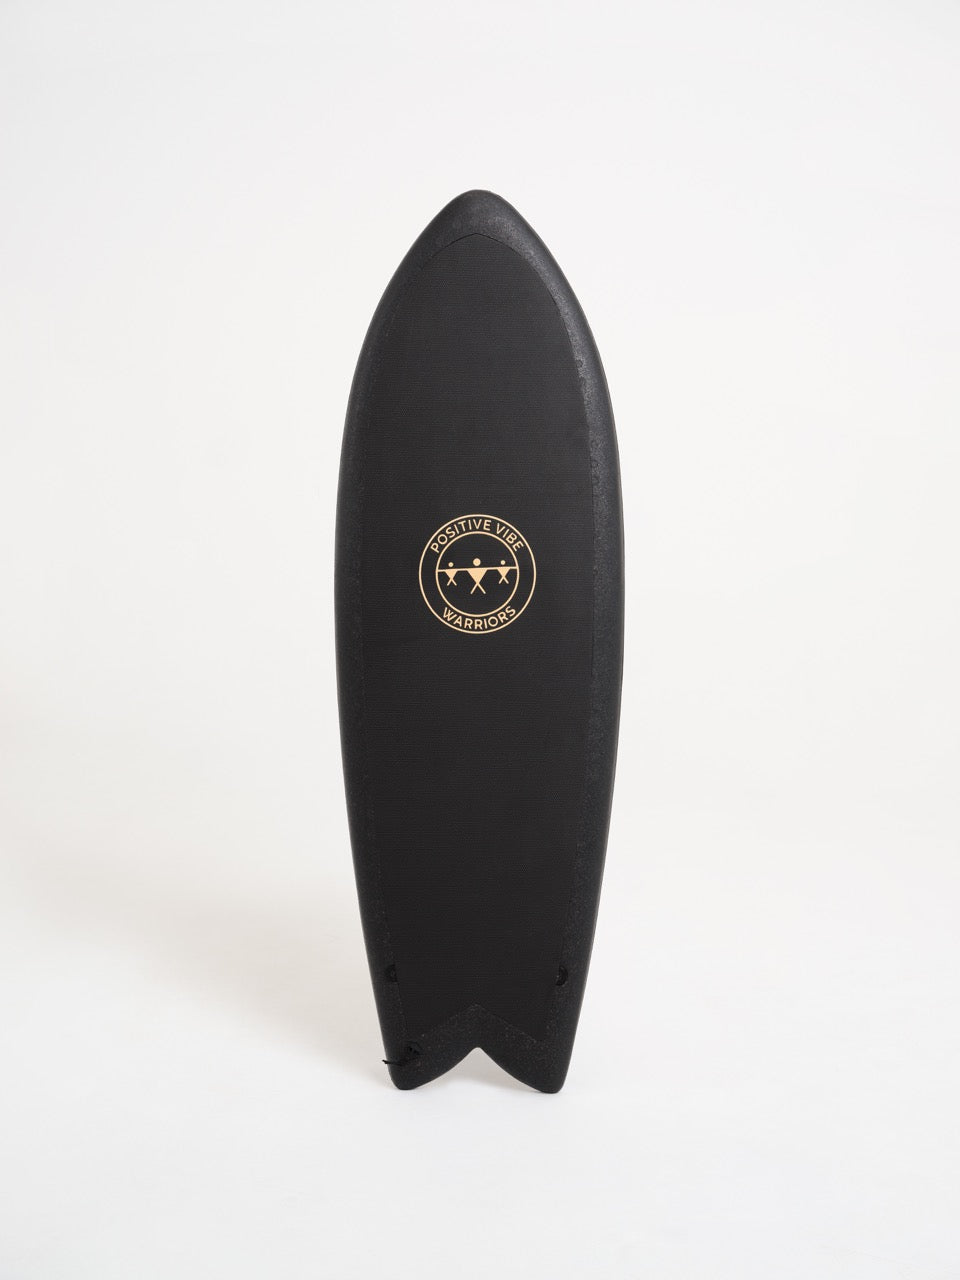 A black 5 foot 3 inch Positive Vibe Warriors Thrill surfboard with a logo illustration on a white background